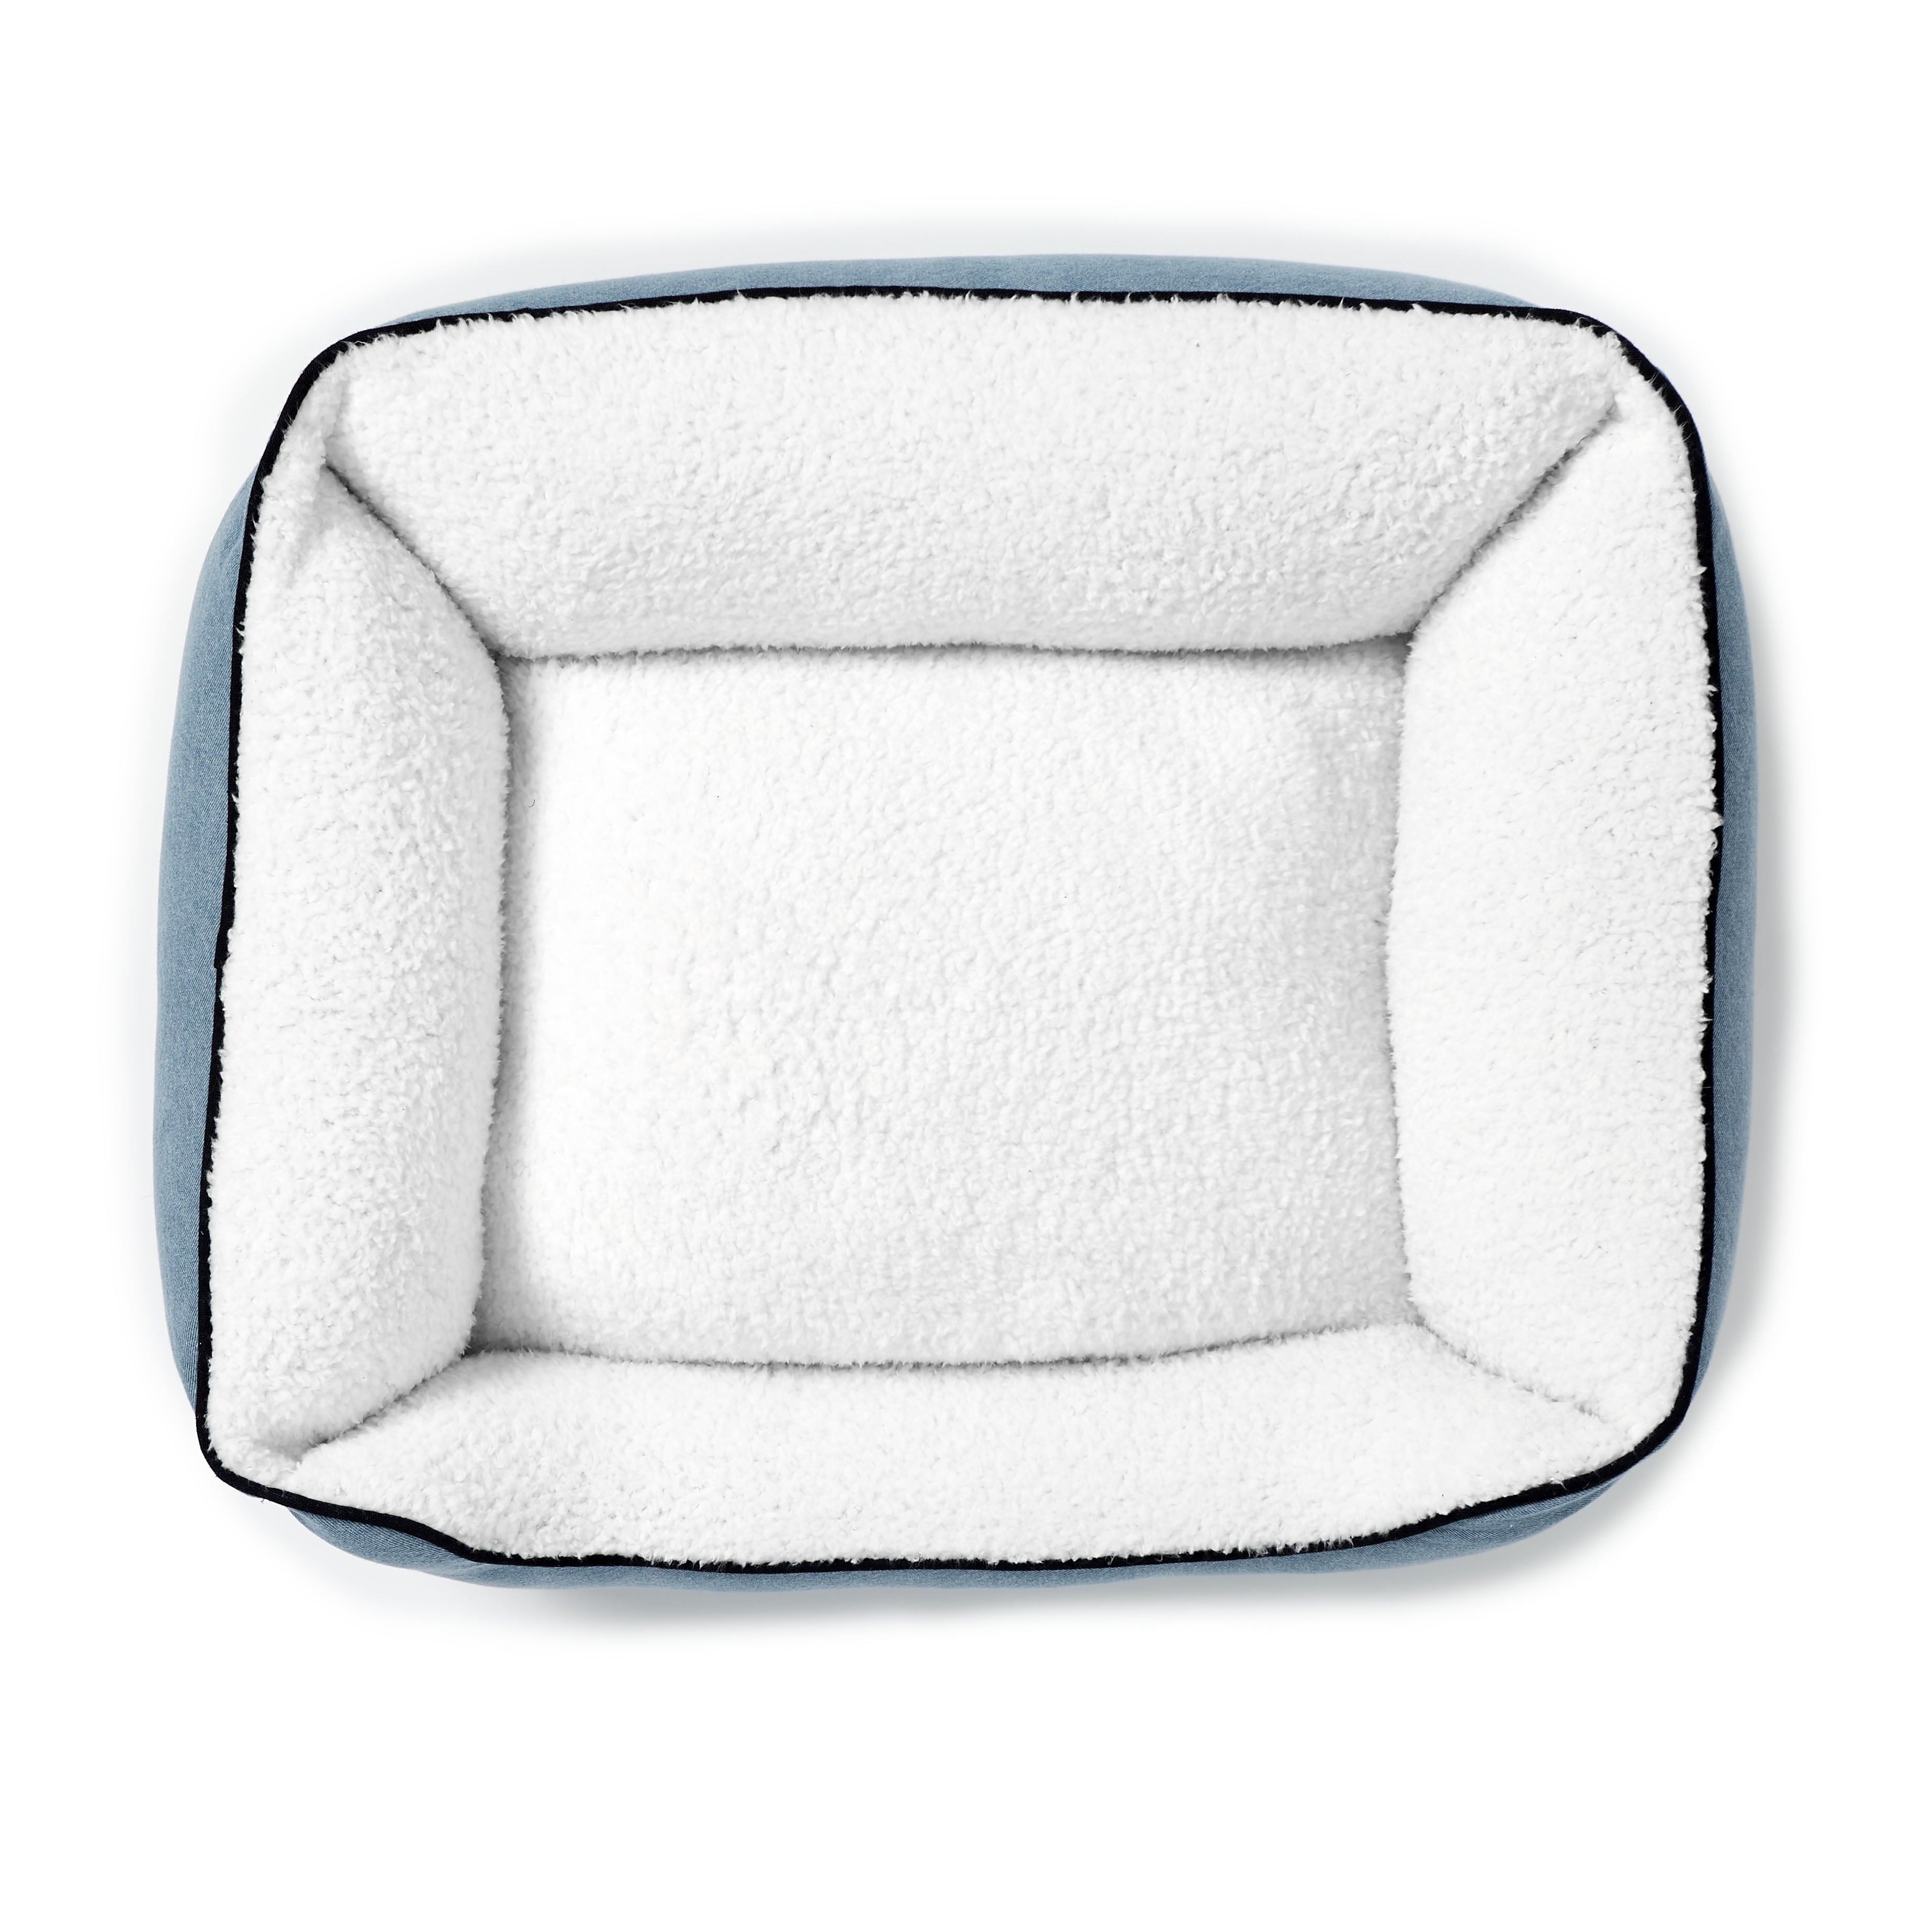 Gap Cuddler Pet Bed, Organic Cotton Cover with Polyester Sherpa inner, Medium